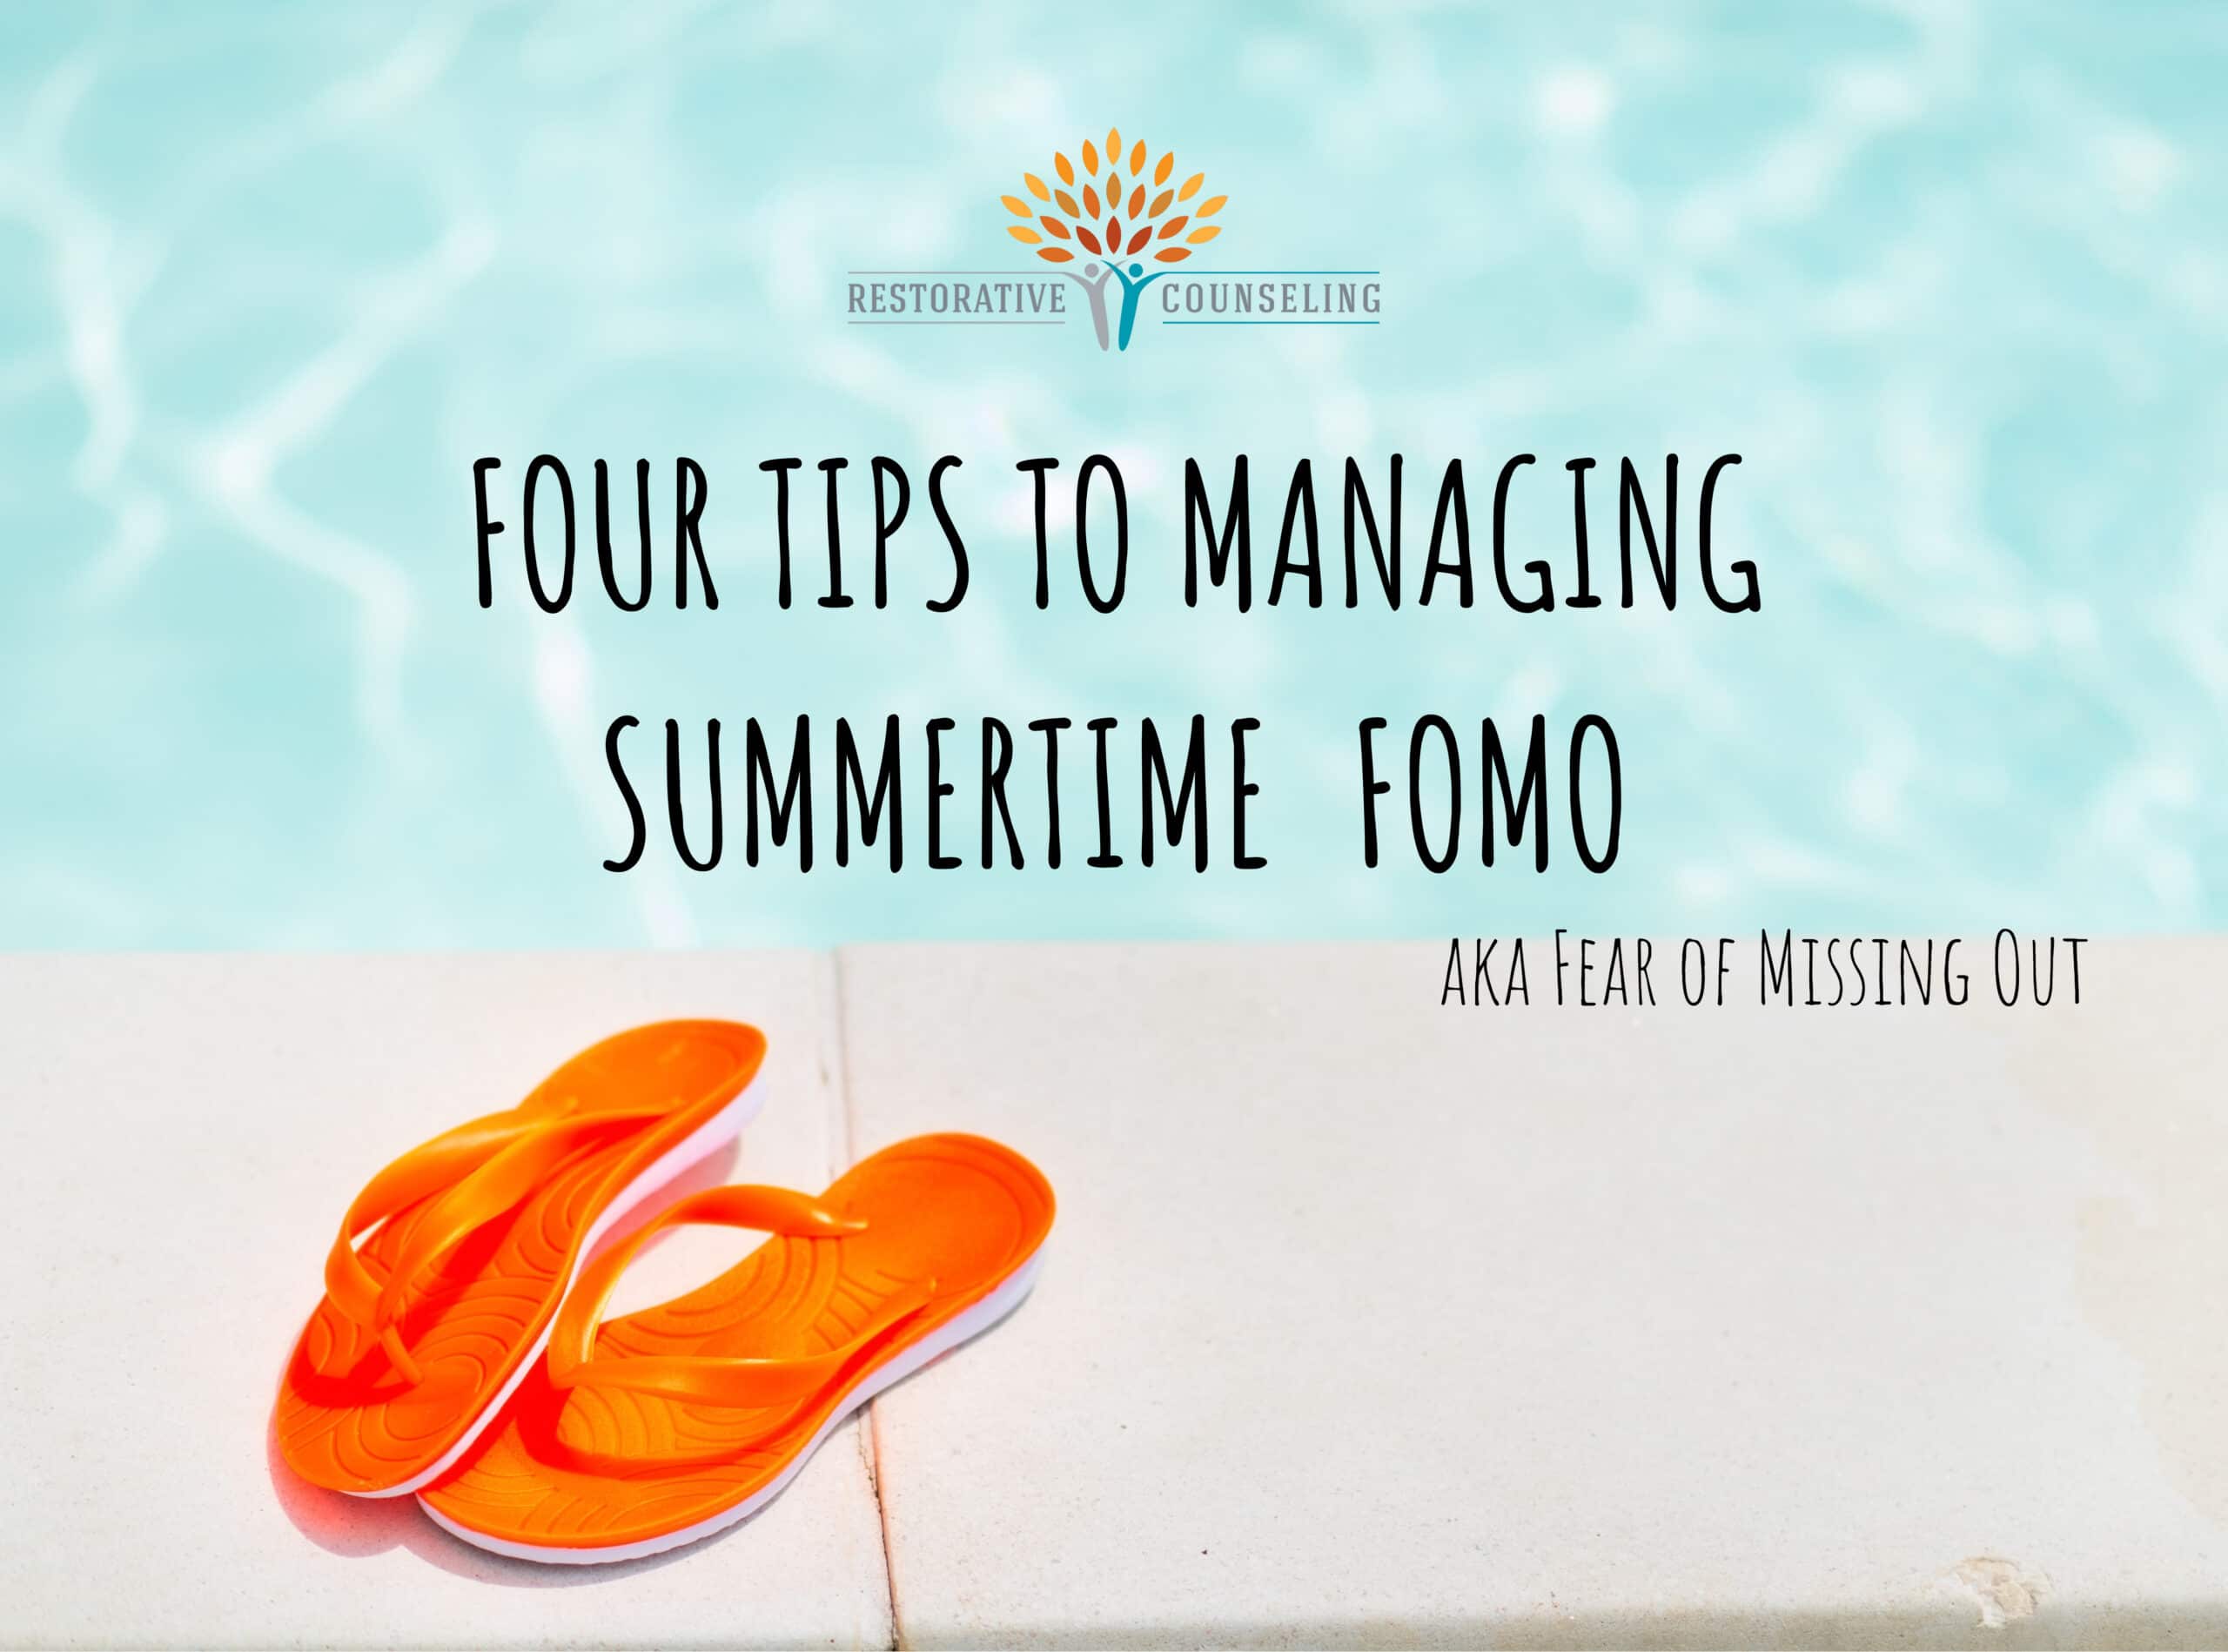 Four tips to managing summertime FOMO